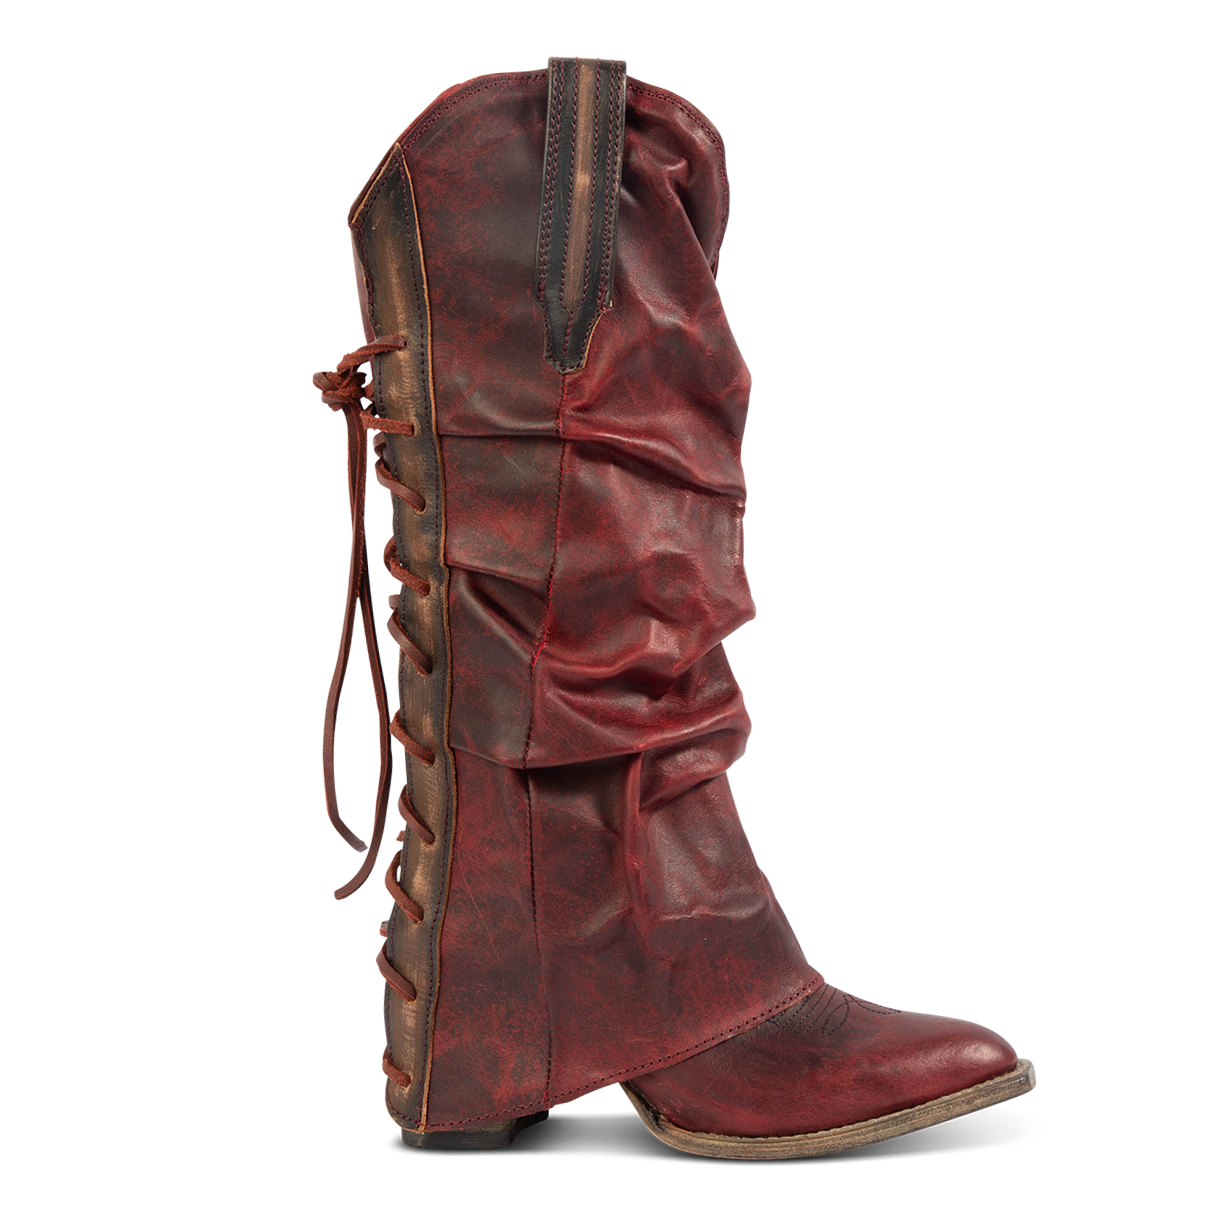 FREEBIRD women's Jules wine leather high flare heel western boot with stitch detailing and back lacing